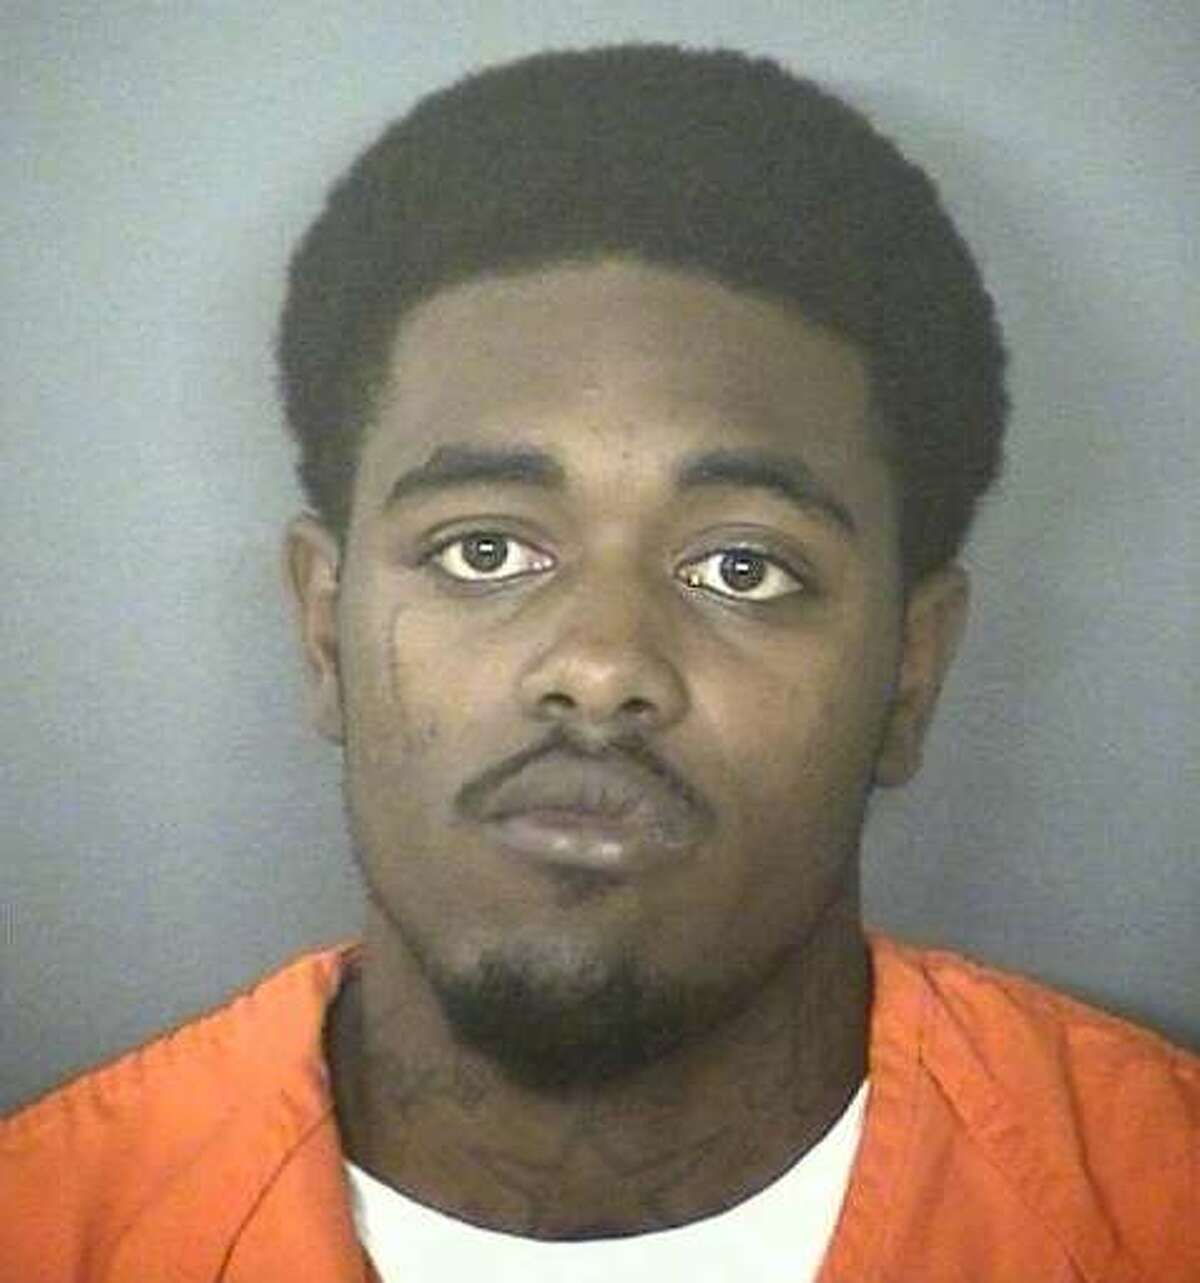 Robert Taylor, 22, is accused of shooting 20-year-old Edwin Acosta multiple times on the East Side last month.